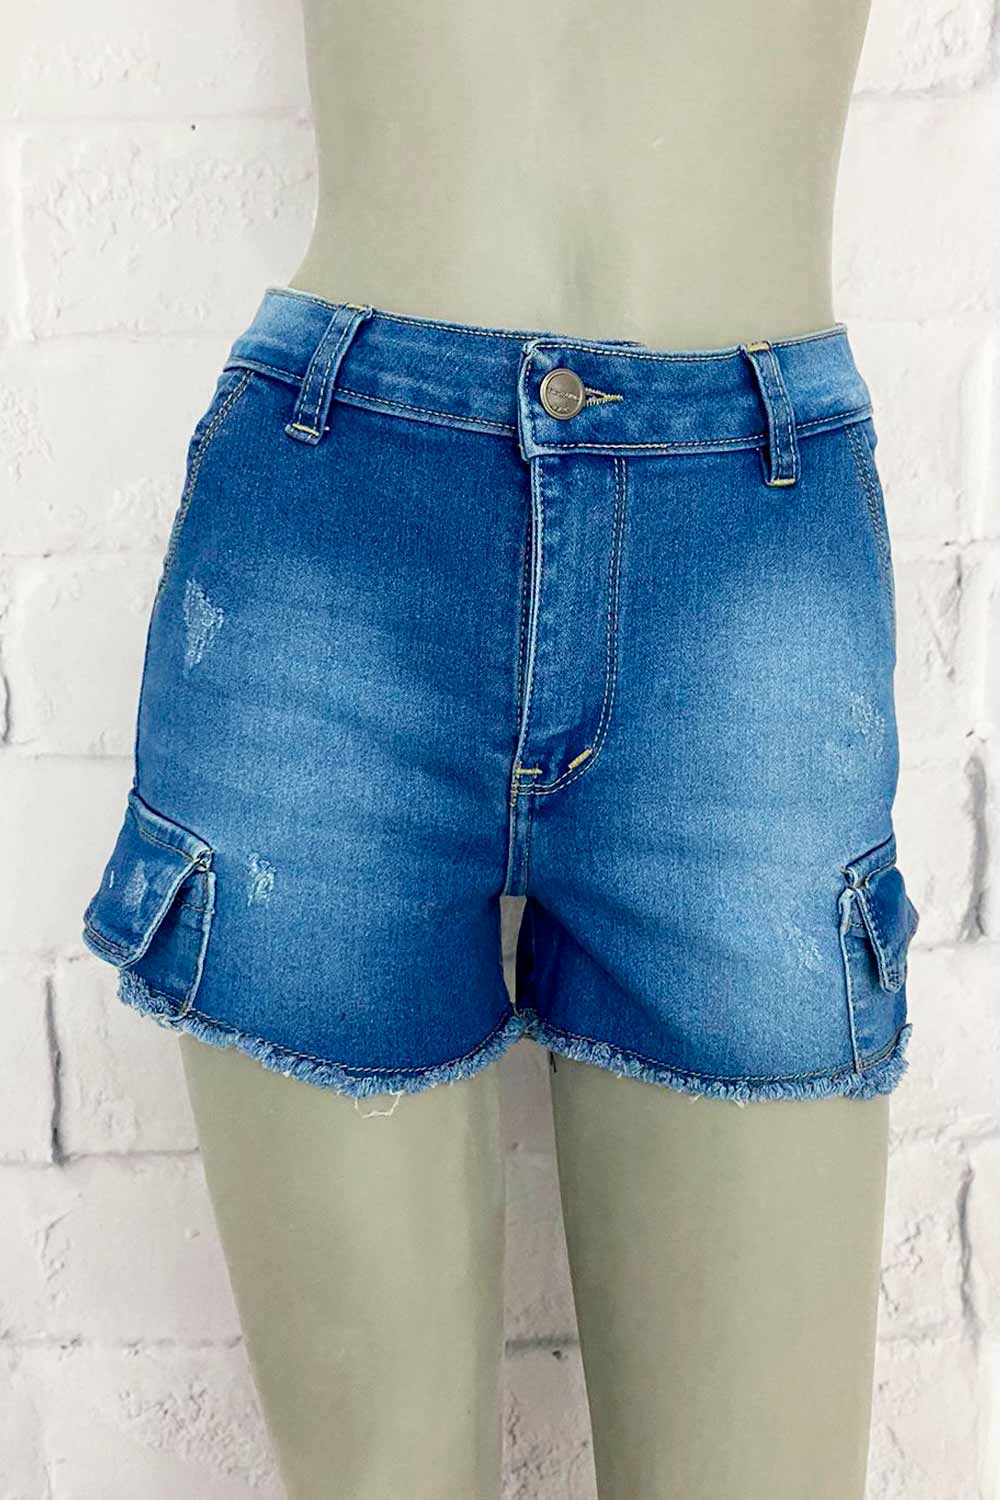 SHORT MUJER JEAN  TIPO CARGO